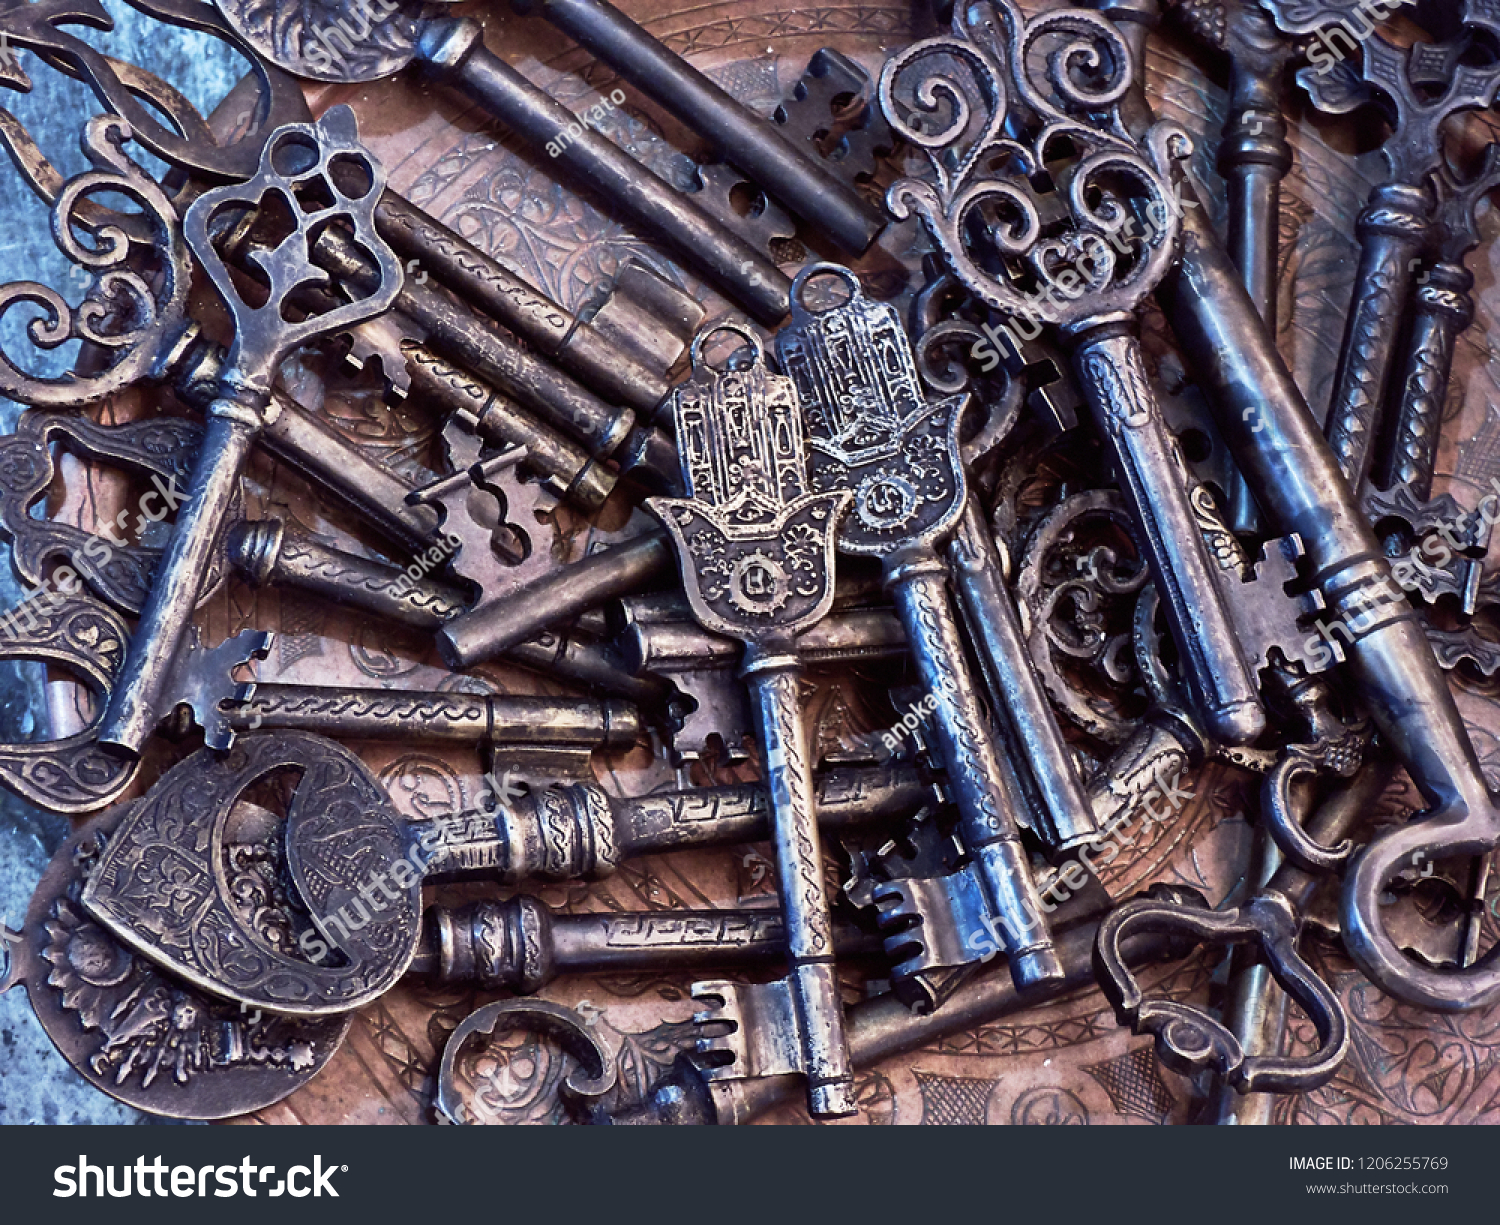 Close Up Of Assorted Antique Vintage Large Oriental Skeleton Keys On Display In An Antiques Street Market In Istanbul. #1206255769